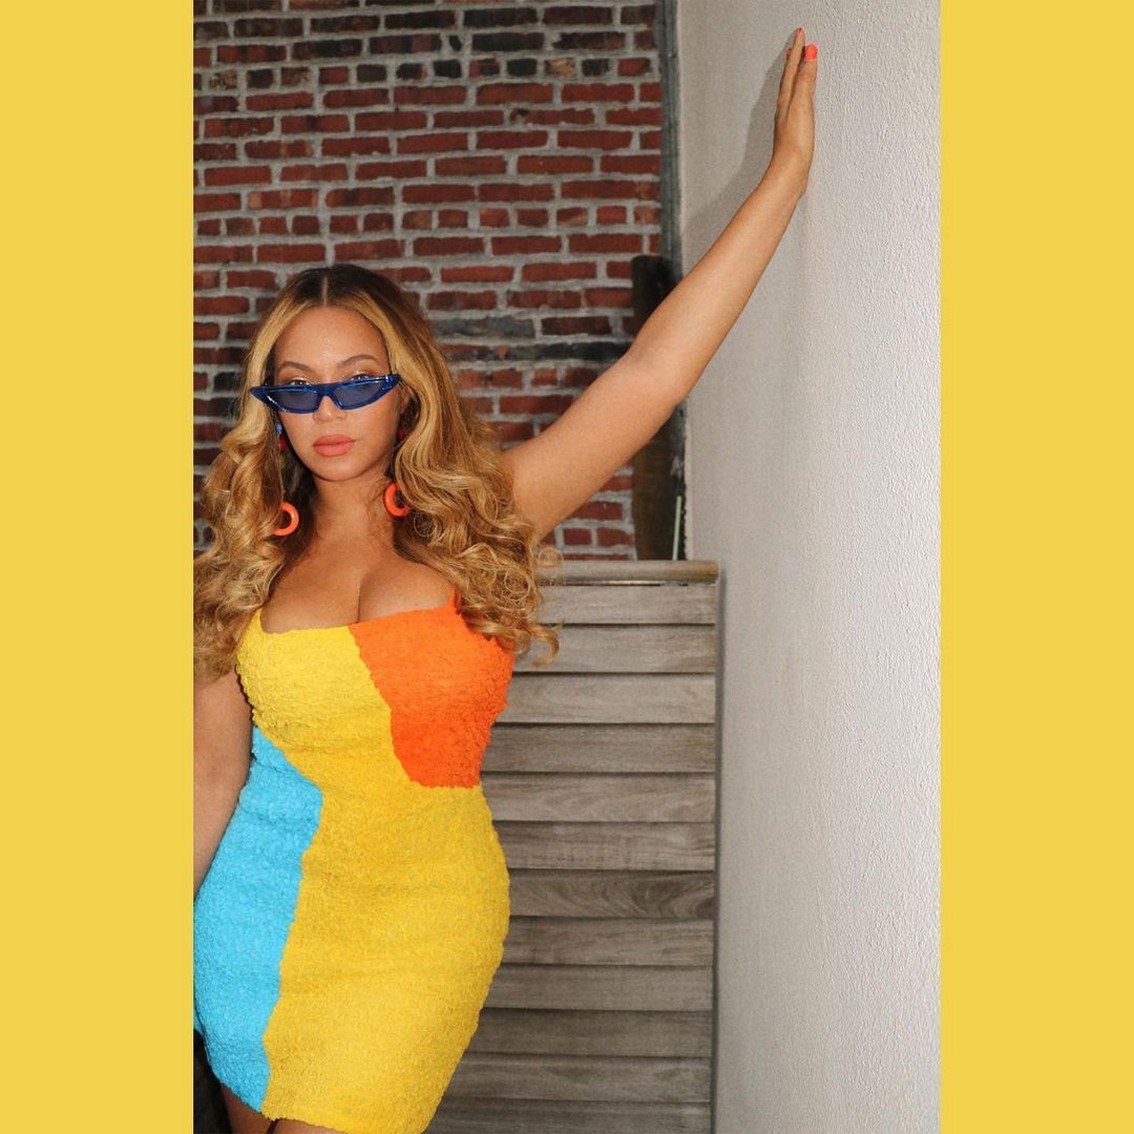 Beyonce Sexy Dress By Mara Hoffman TheFappening.Pro 1 - Beyonce Hot In A Little Dress (4 Photos)